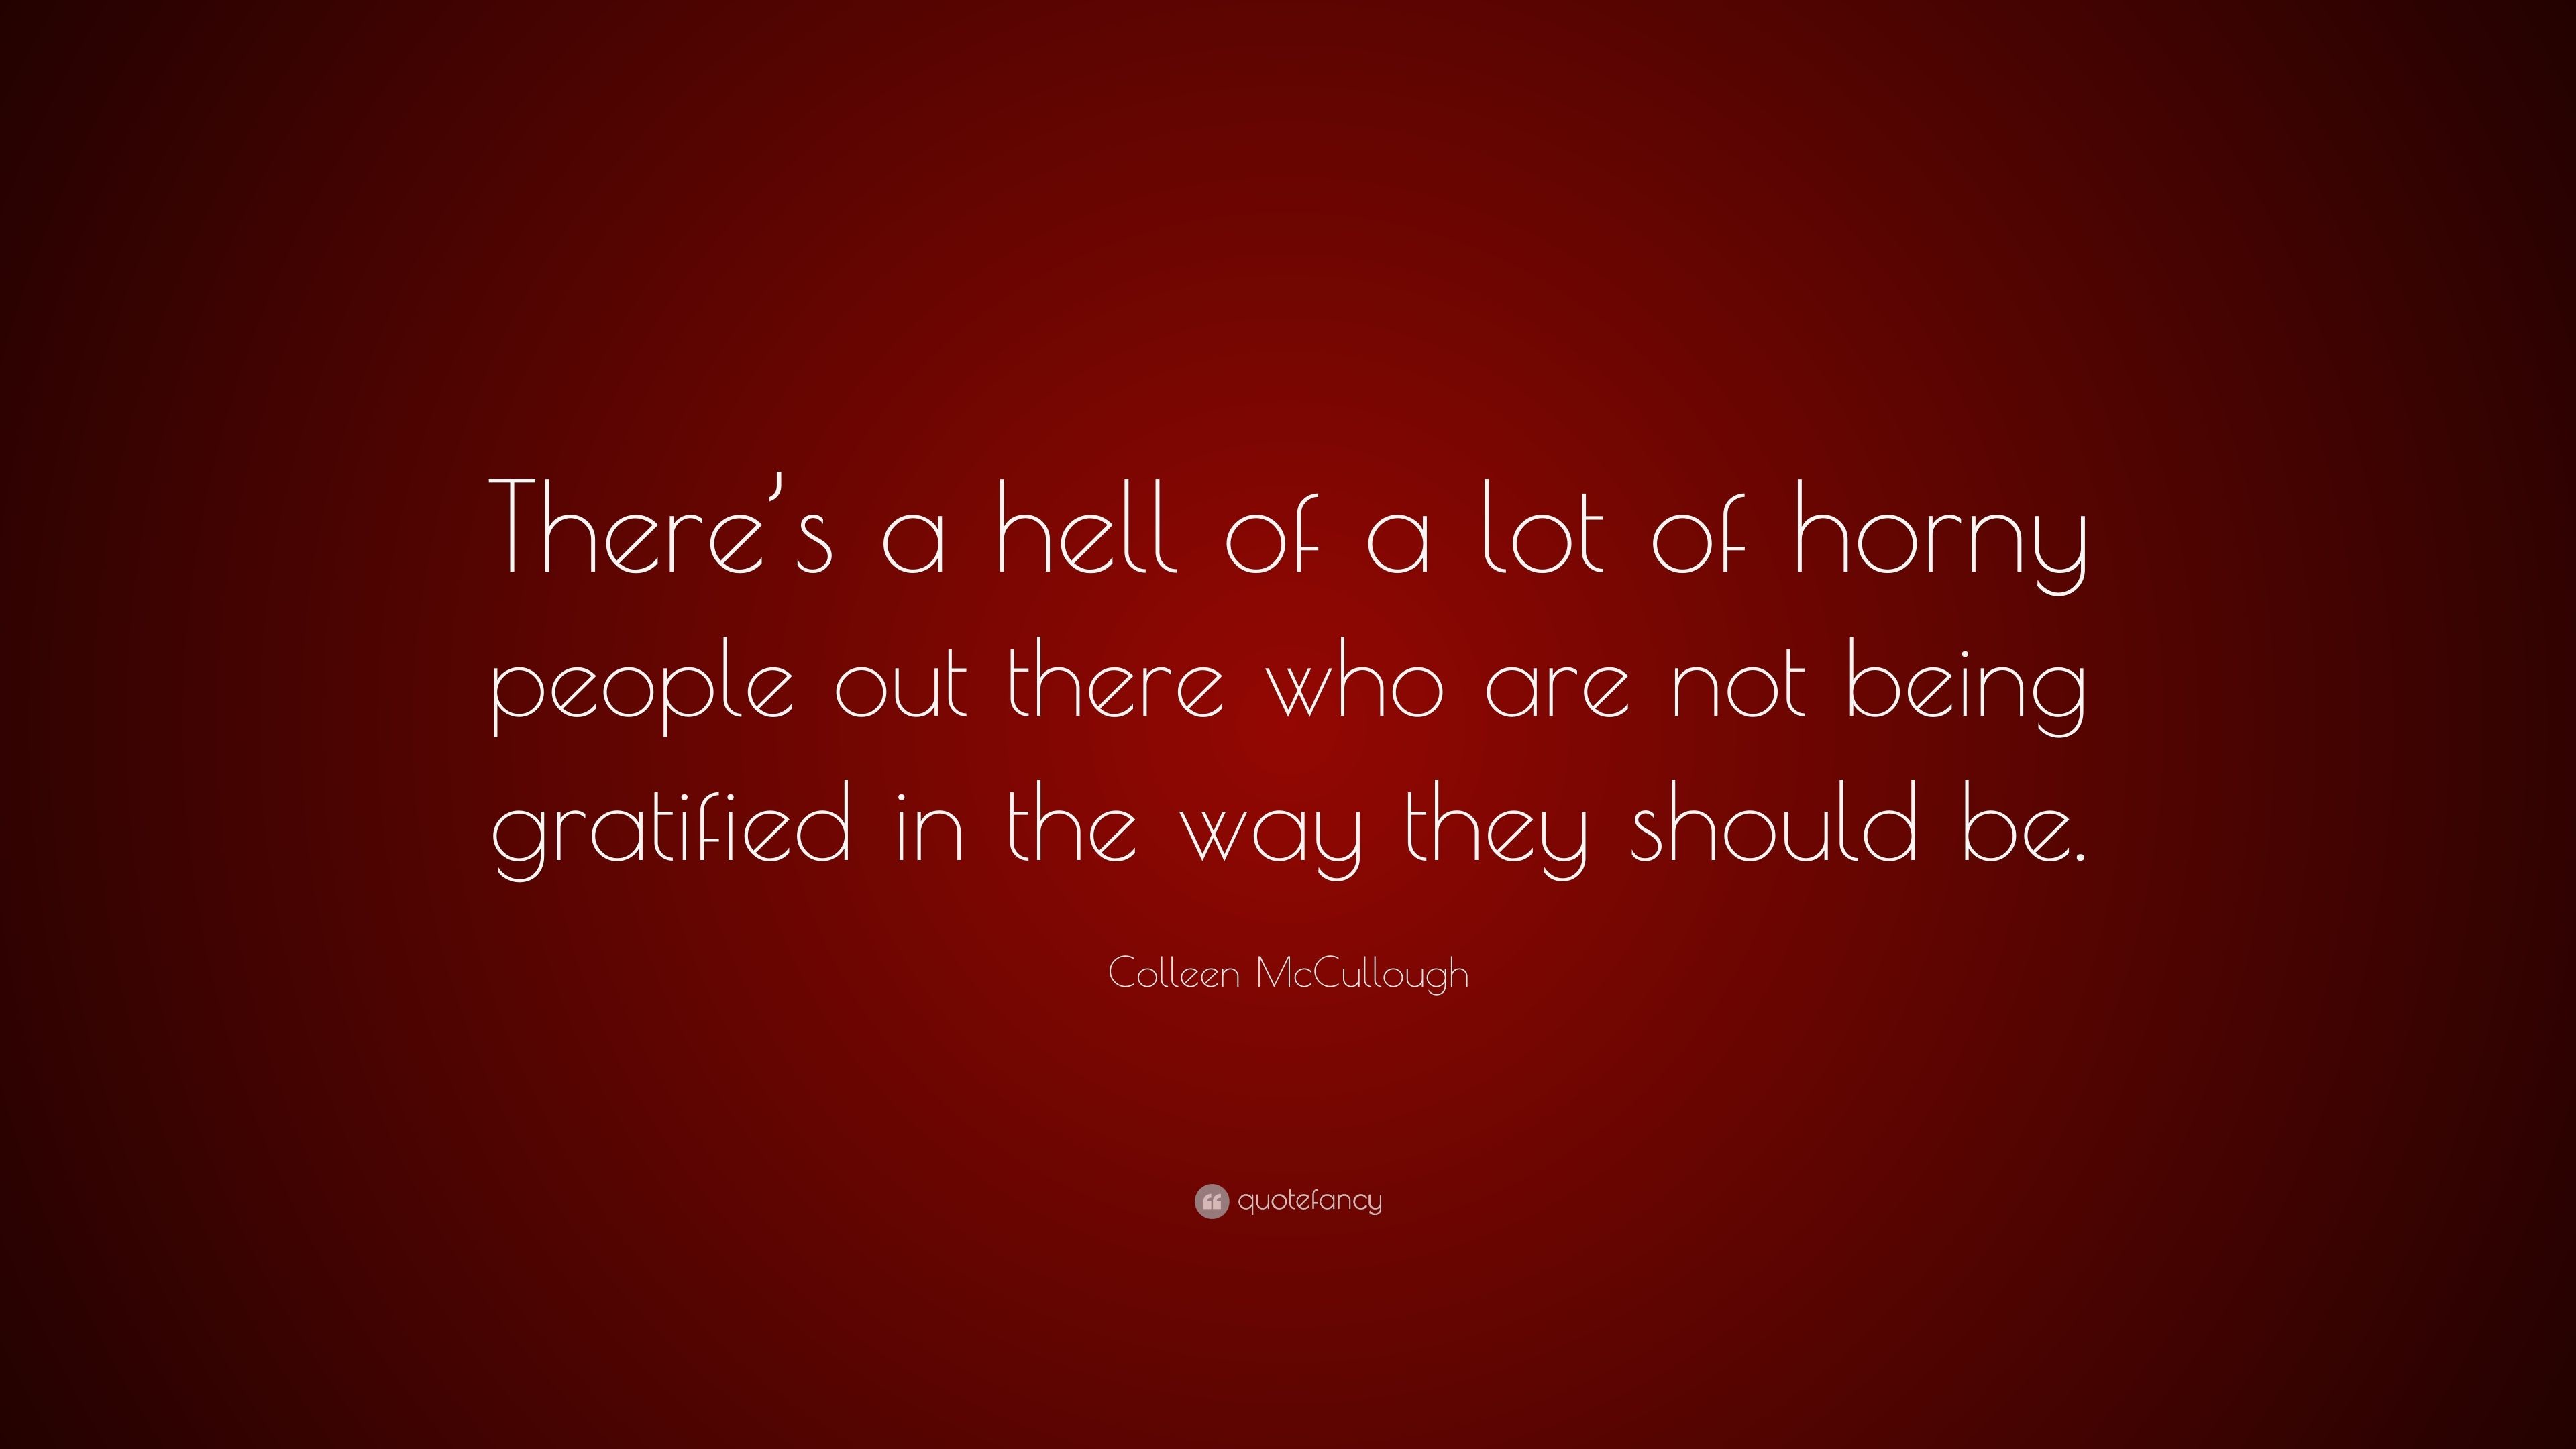 3840x2160 Colleen McCullough Quote: “There's a hell of a lot of horny people out there